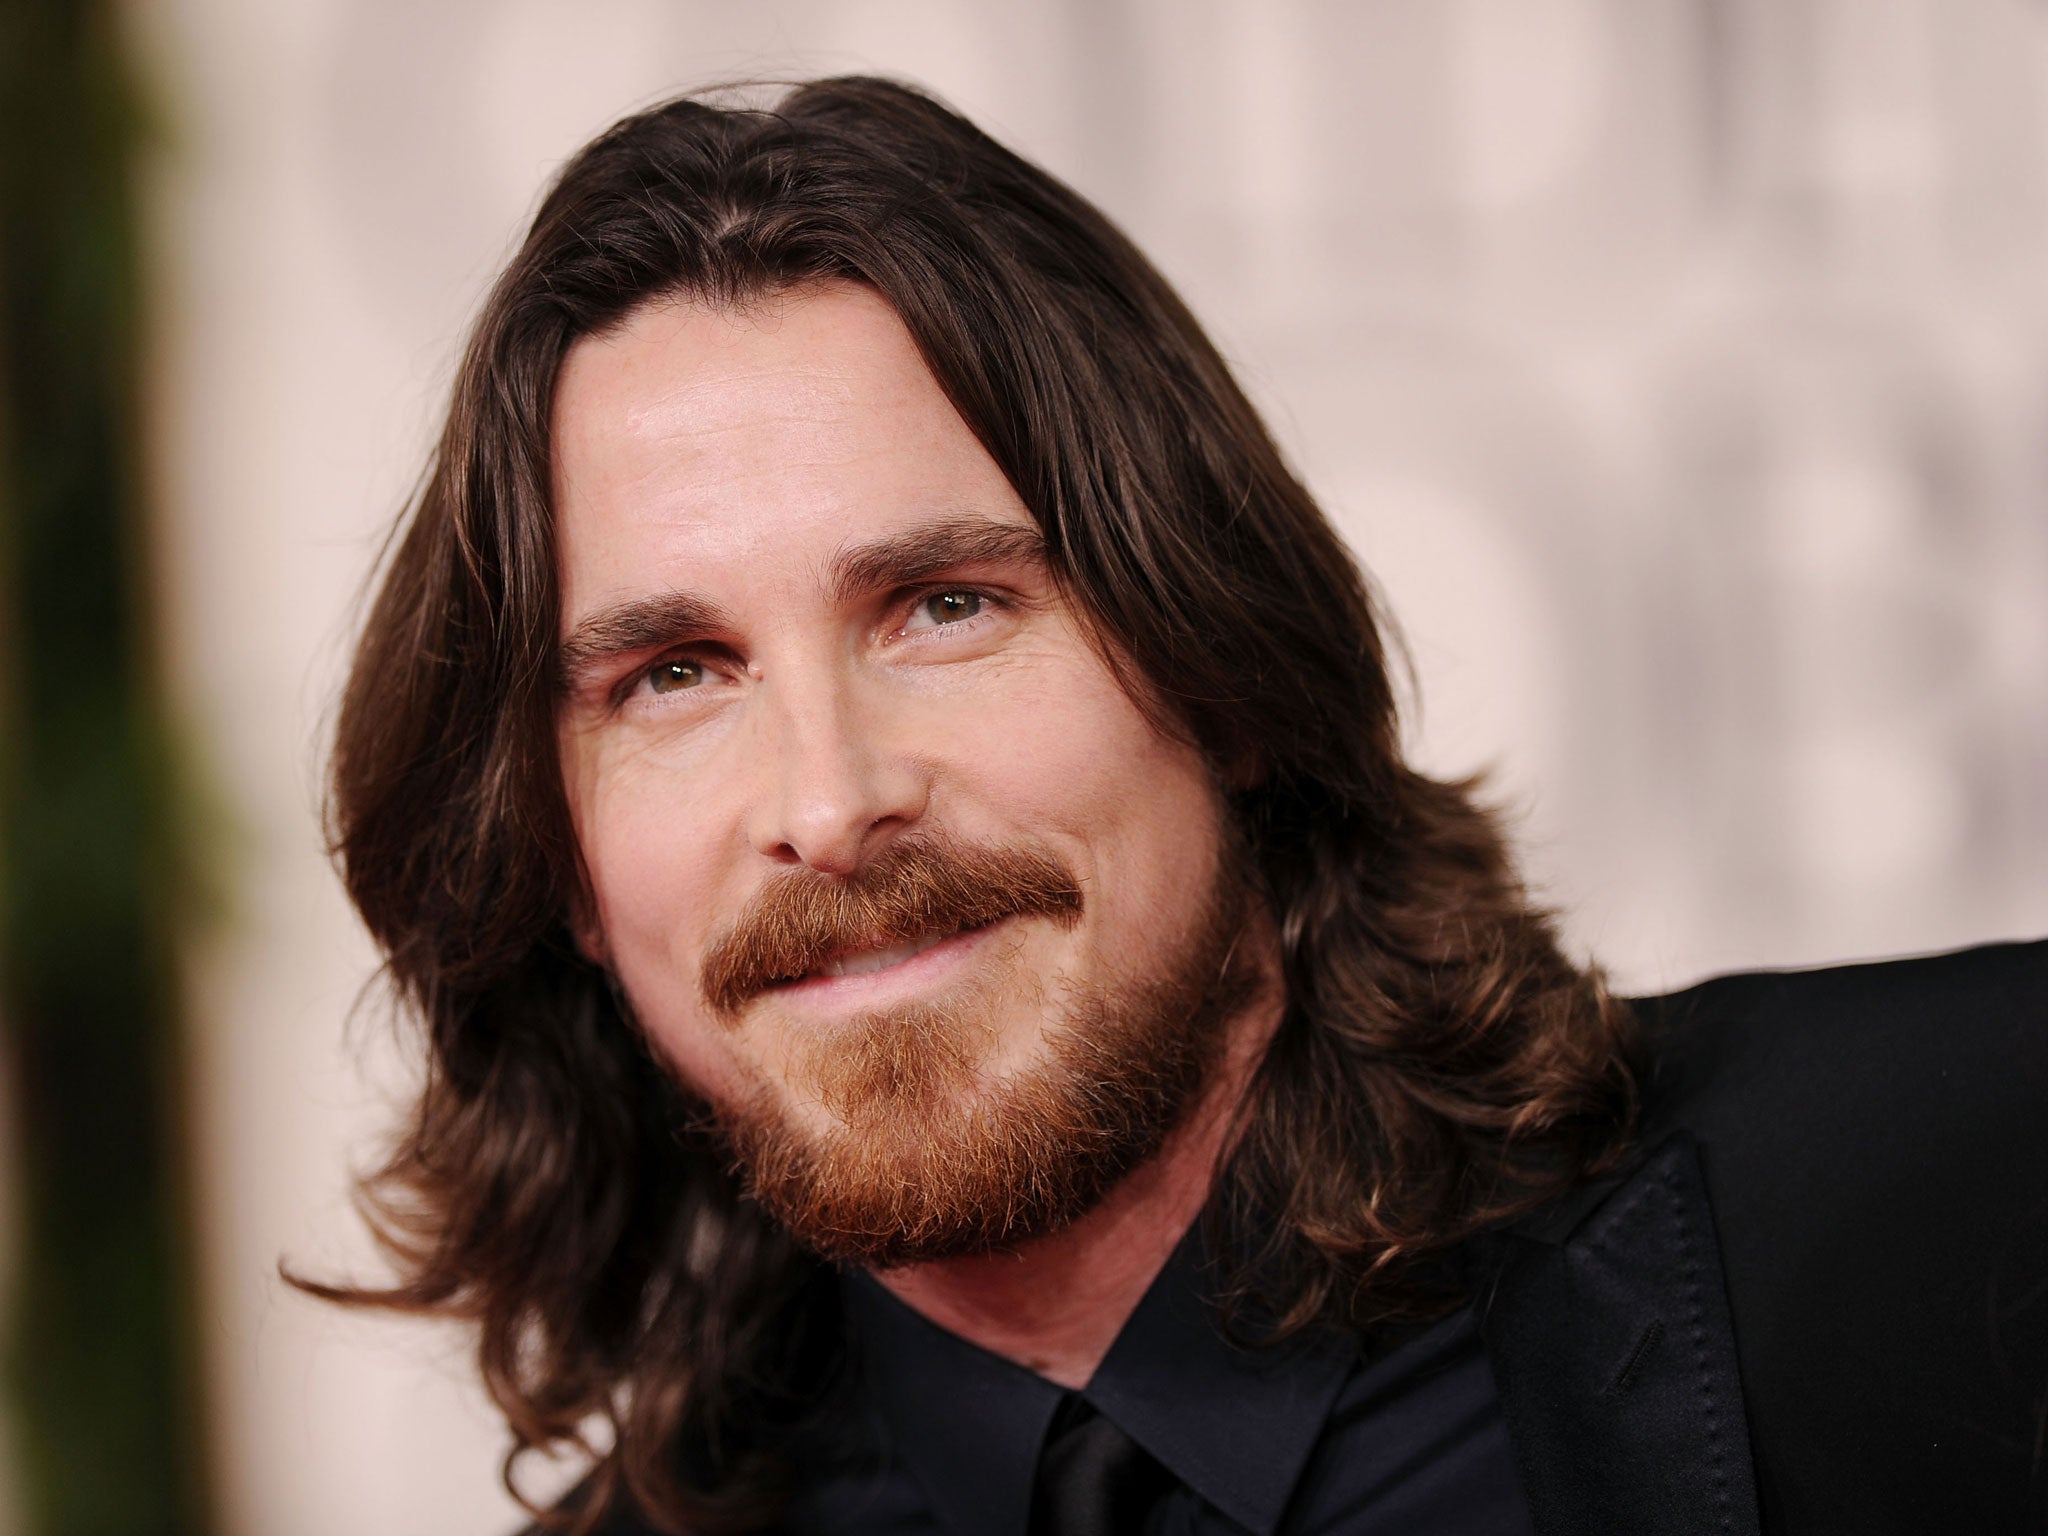 Christian Bale will voice panther Bagheera in Warner Bros' rival Jungle Book movie